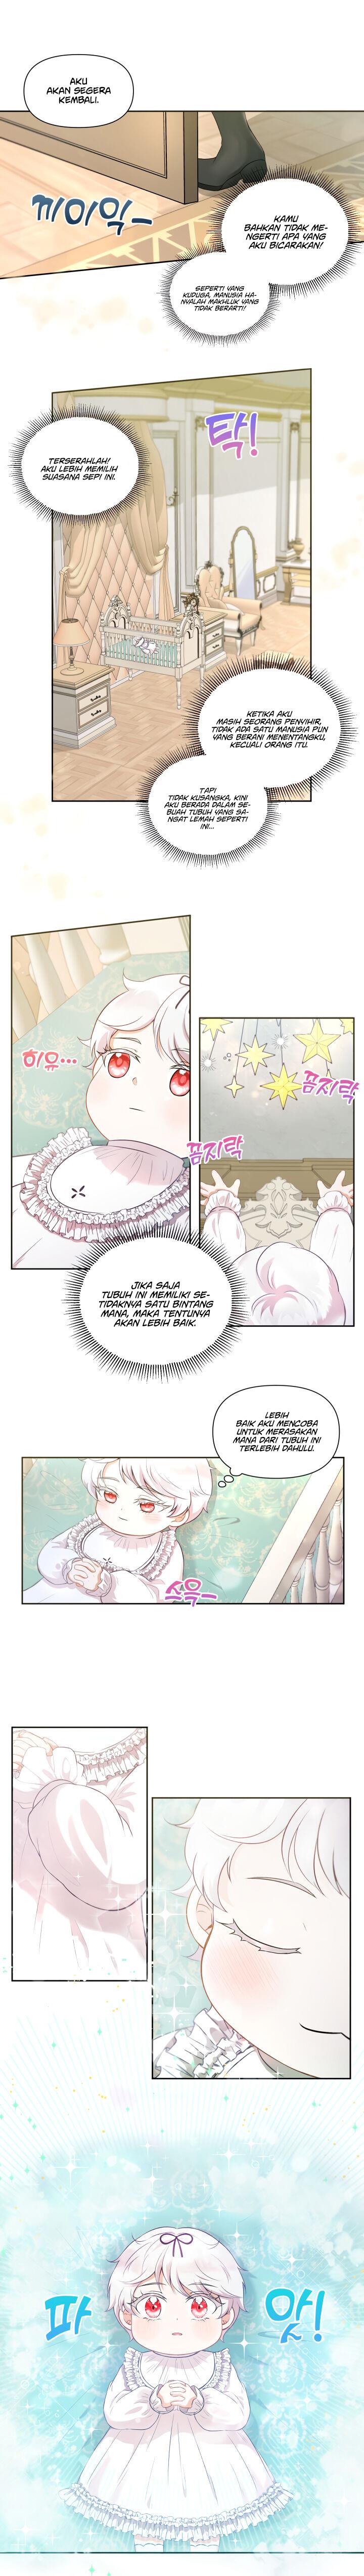 The Wicked Little Princess Chapter 2